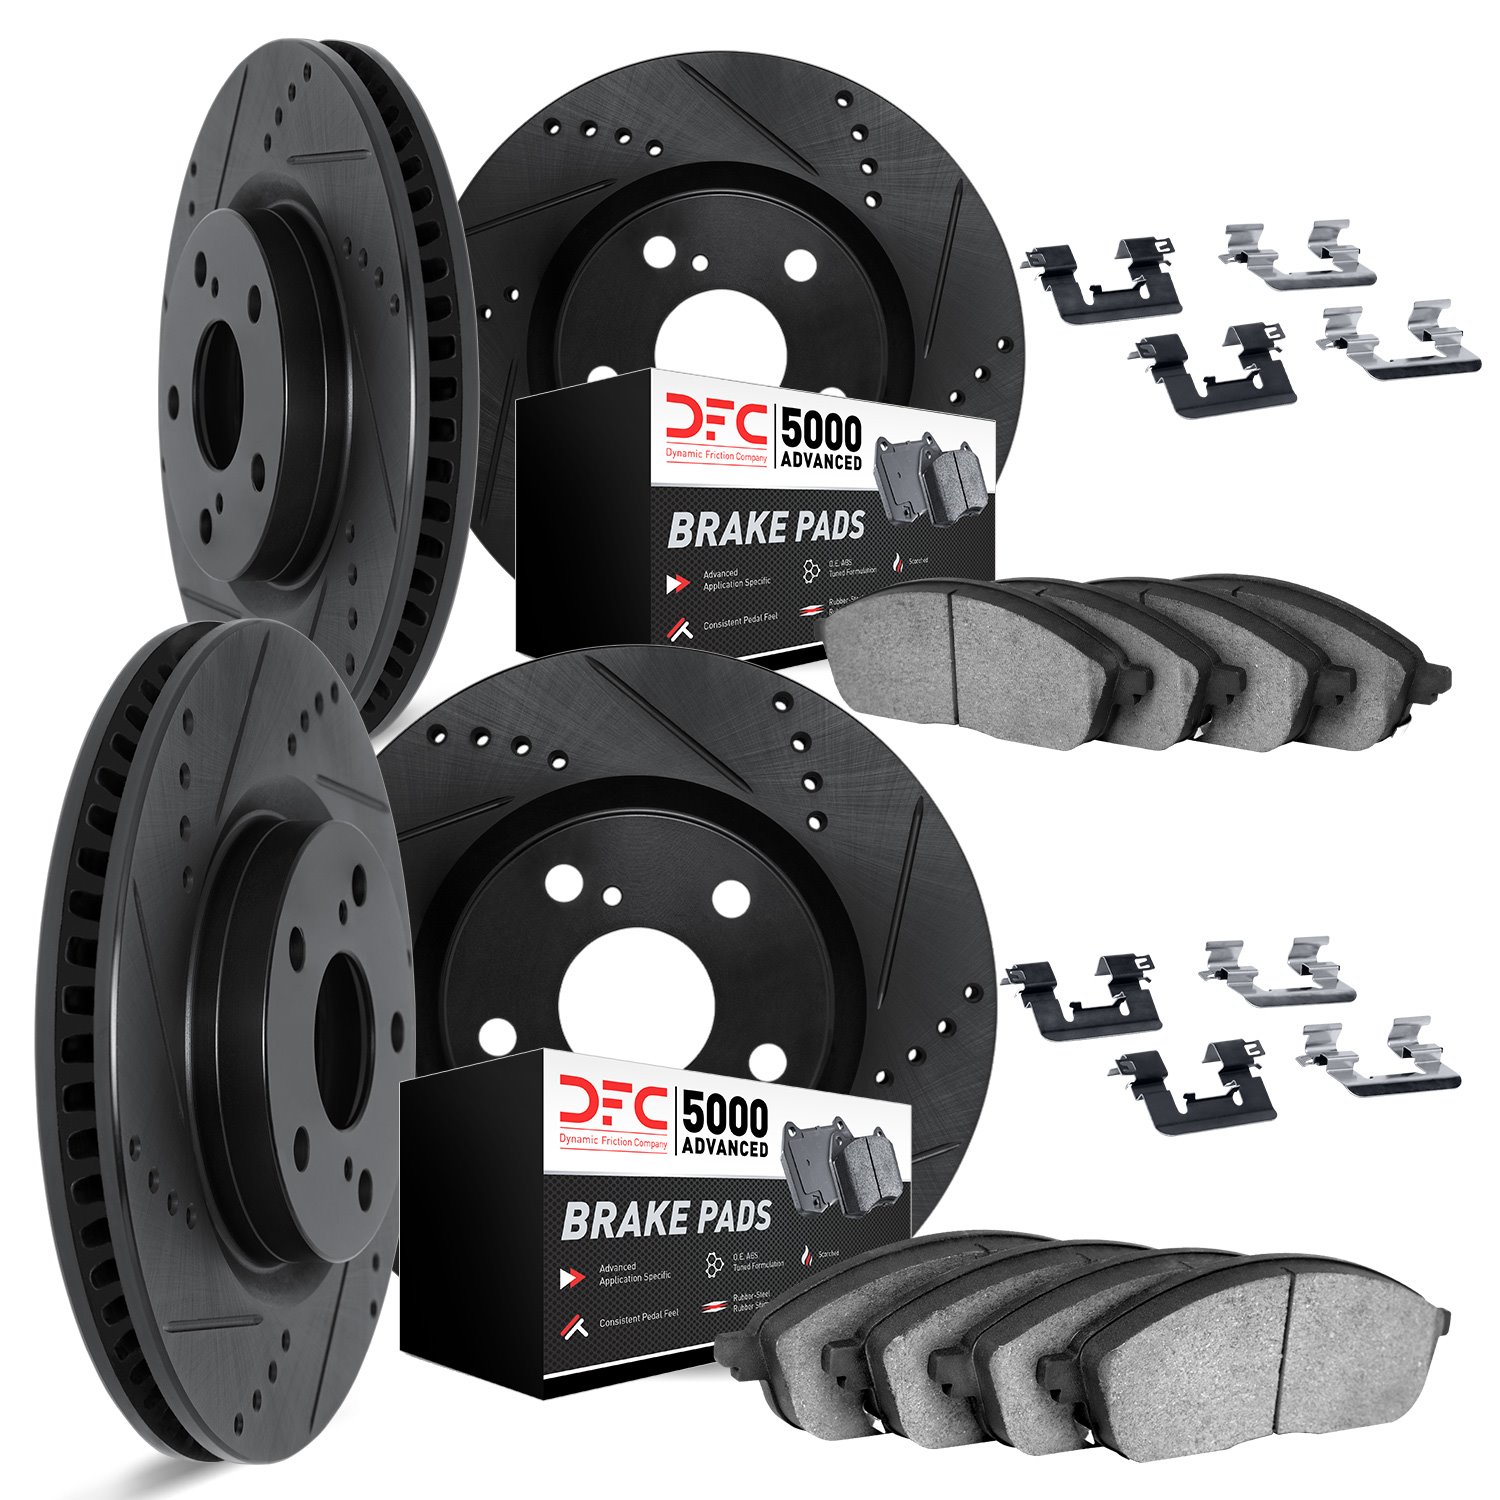 8514-31063 Drilled/Slotted Brake Rotors w/5000 Advanced Brake Pads Kit & Hardware [Black], 2011-2014 BMW, Position: Front and Re